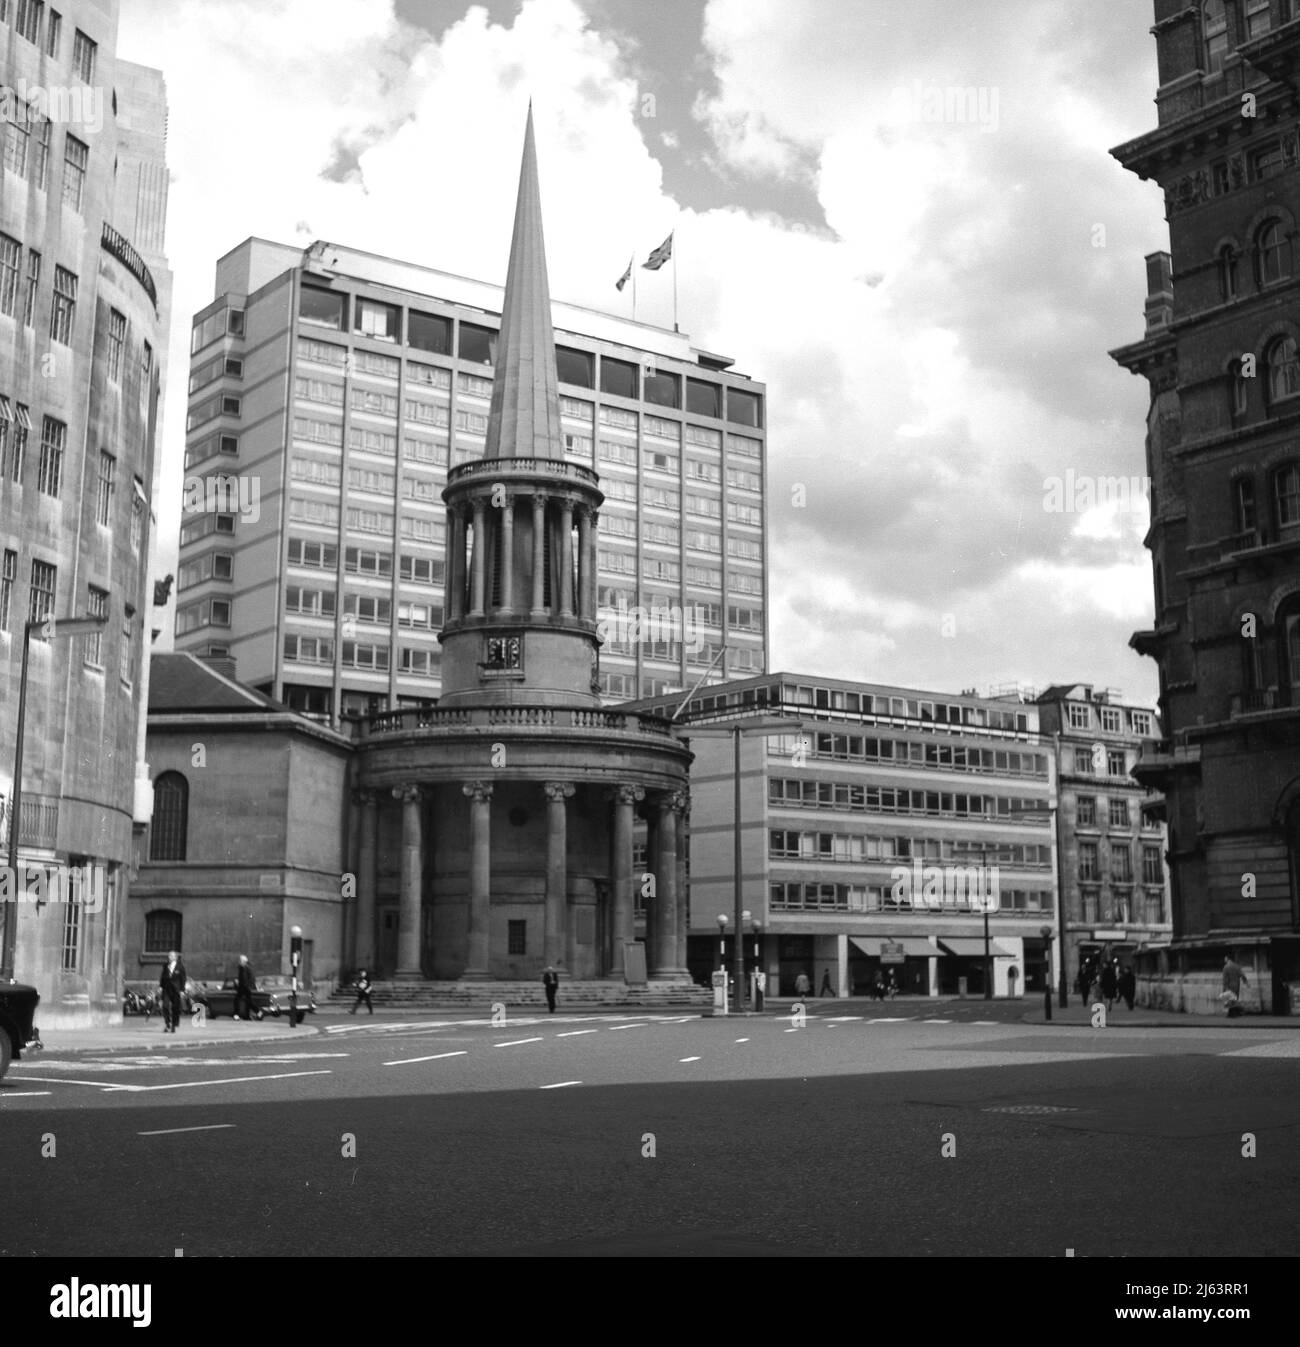 1960s, All Souls church at Langham Place, Marylebone. On the left of the picture, Broadcasting House, headquarters of the BBC in London. With its distinctive spired circular vestibule, the church was built in the Regency style in 1824 from a design by John Nash. Behind the church, modern office blocks of the era, certainly not in any recognised architectural style, but a standard rectangular shape and built of pre-cast concrete panels with extensive windows. So callled 'modernism' in style, this dull building design was repeated all over London in the 1960s, being cheap and quick to build. Stock Photo